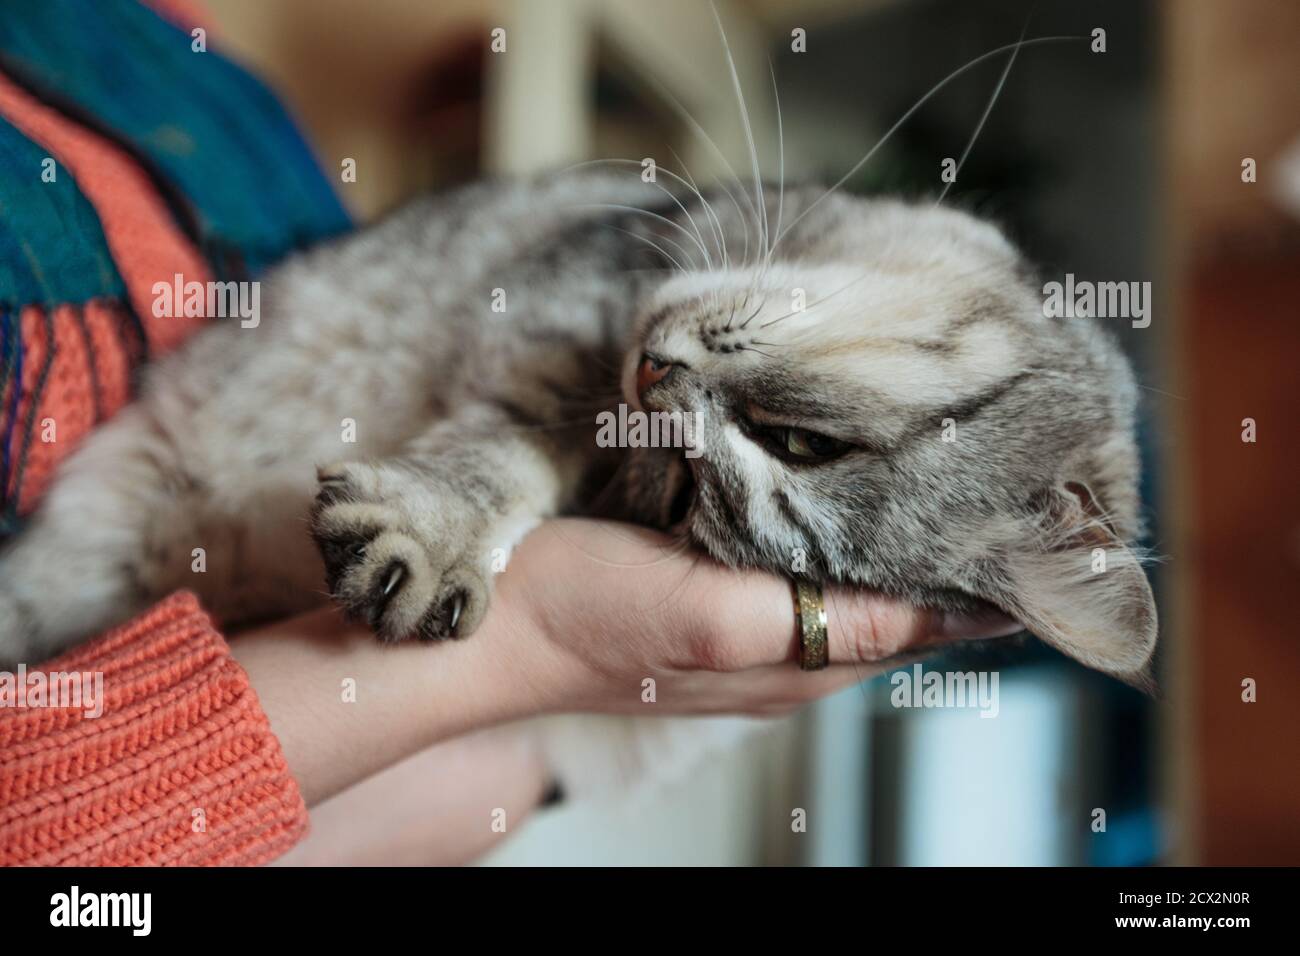 Caring hands taking a cute grey adult cat. Beautiful contended cat relax and lying in the hands Stock Photo